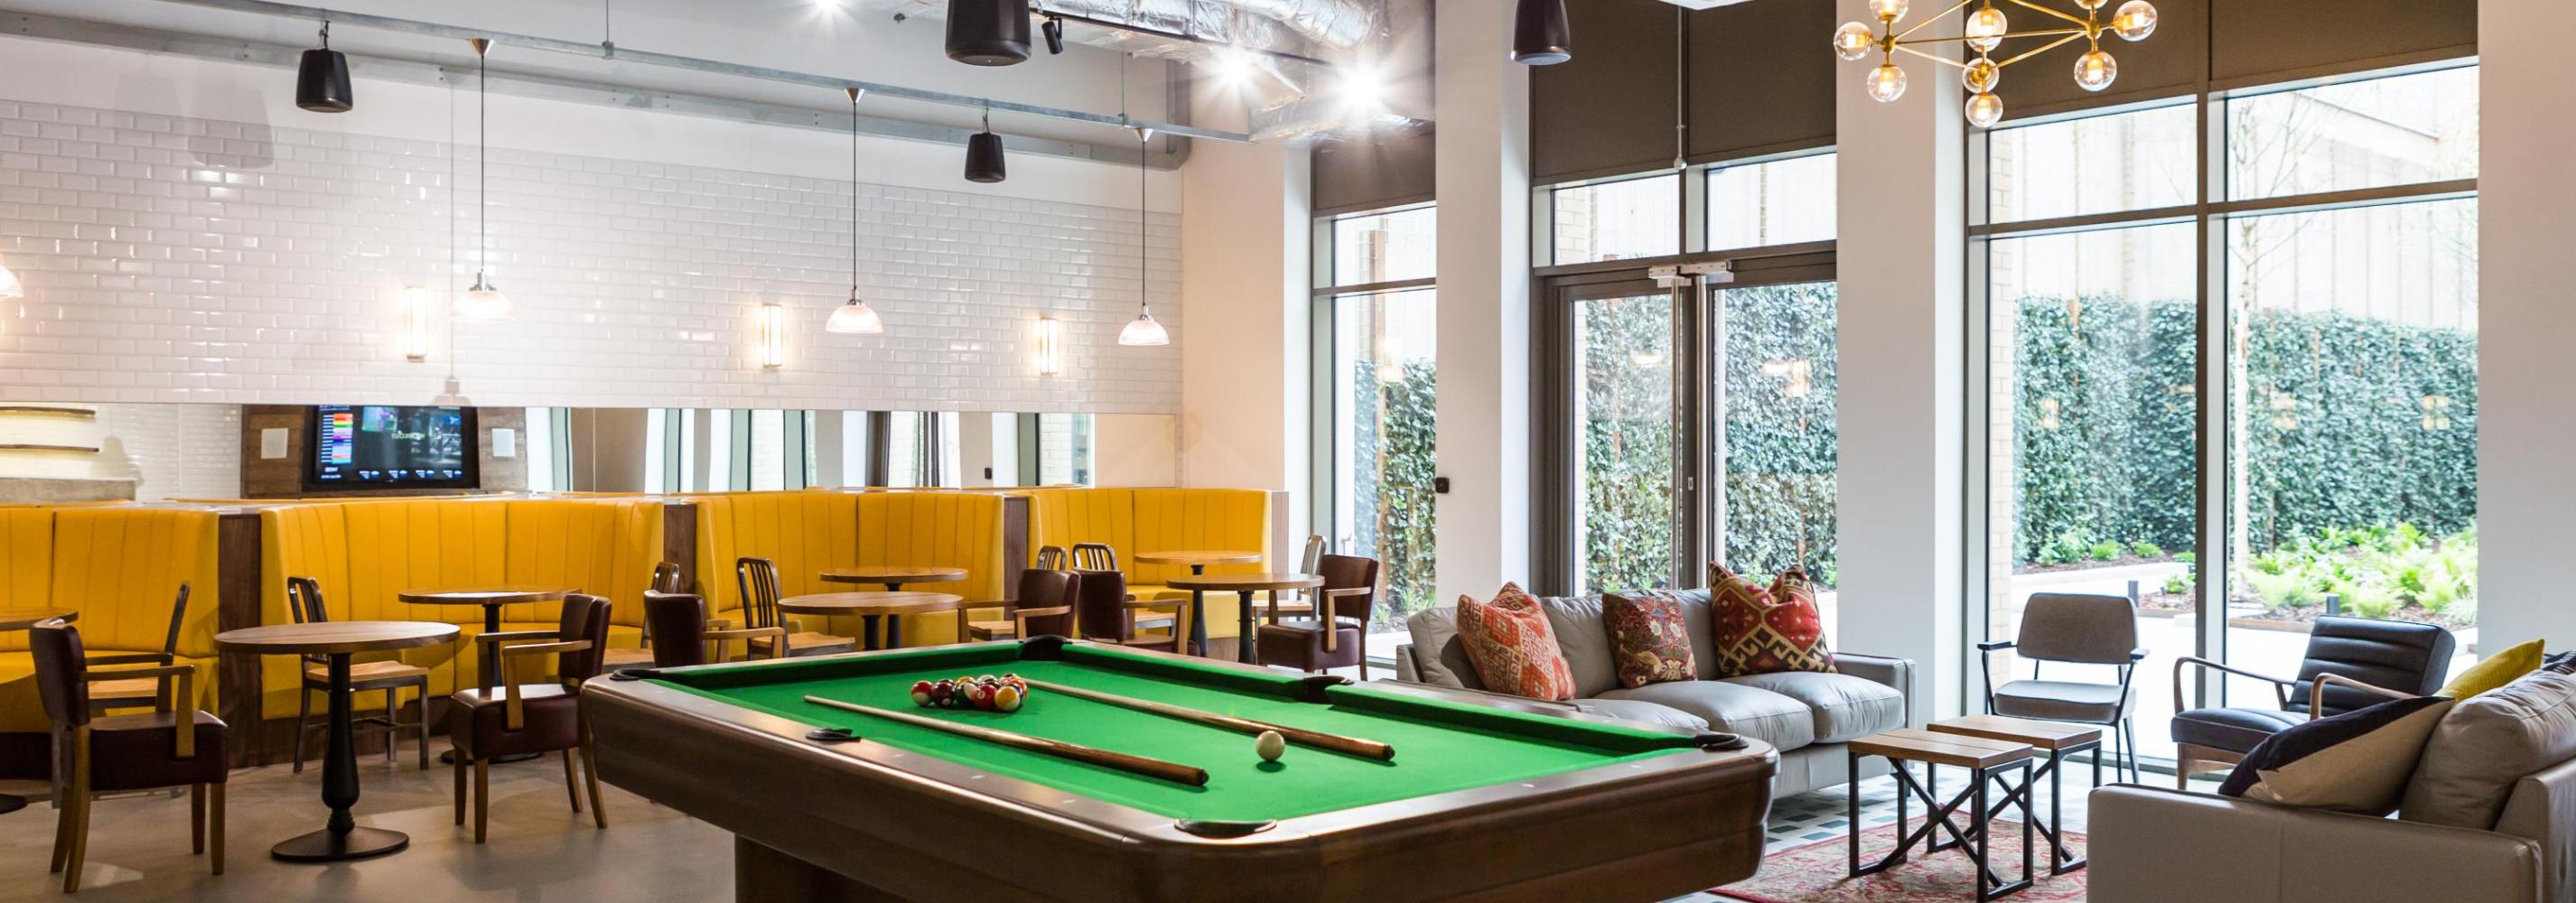 Common Room with pool table and seating